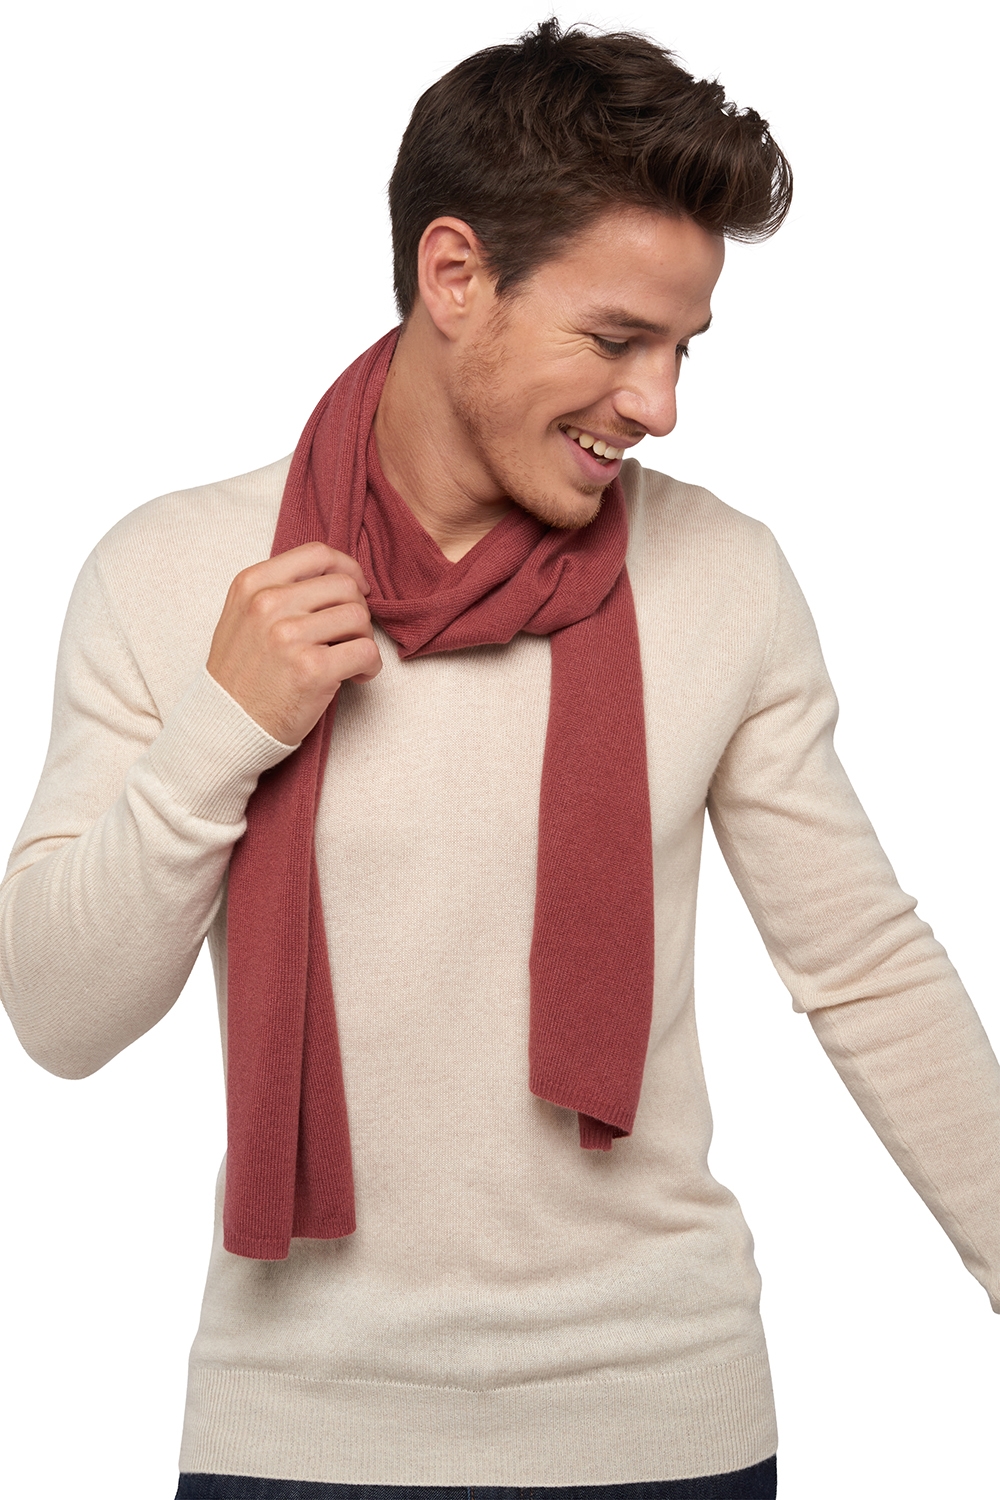 Cashmere men scarves mufflers ozone rosewood 160 x 30 cm